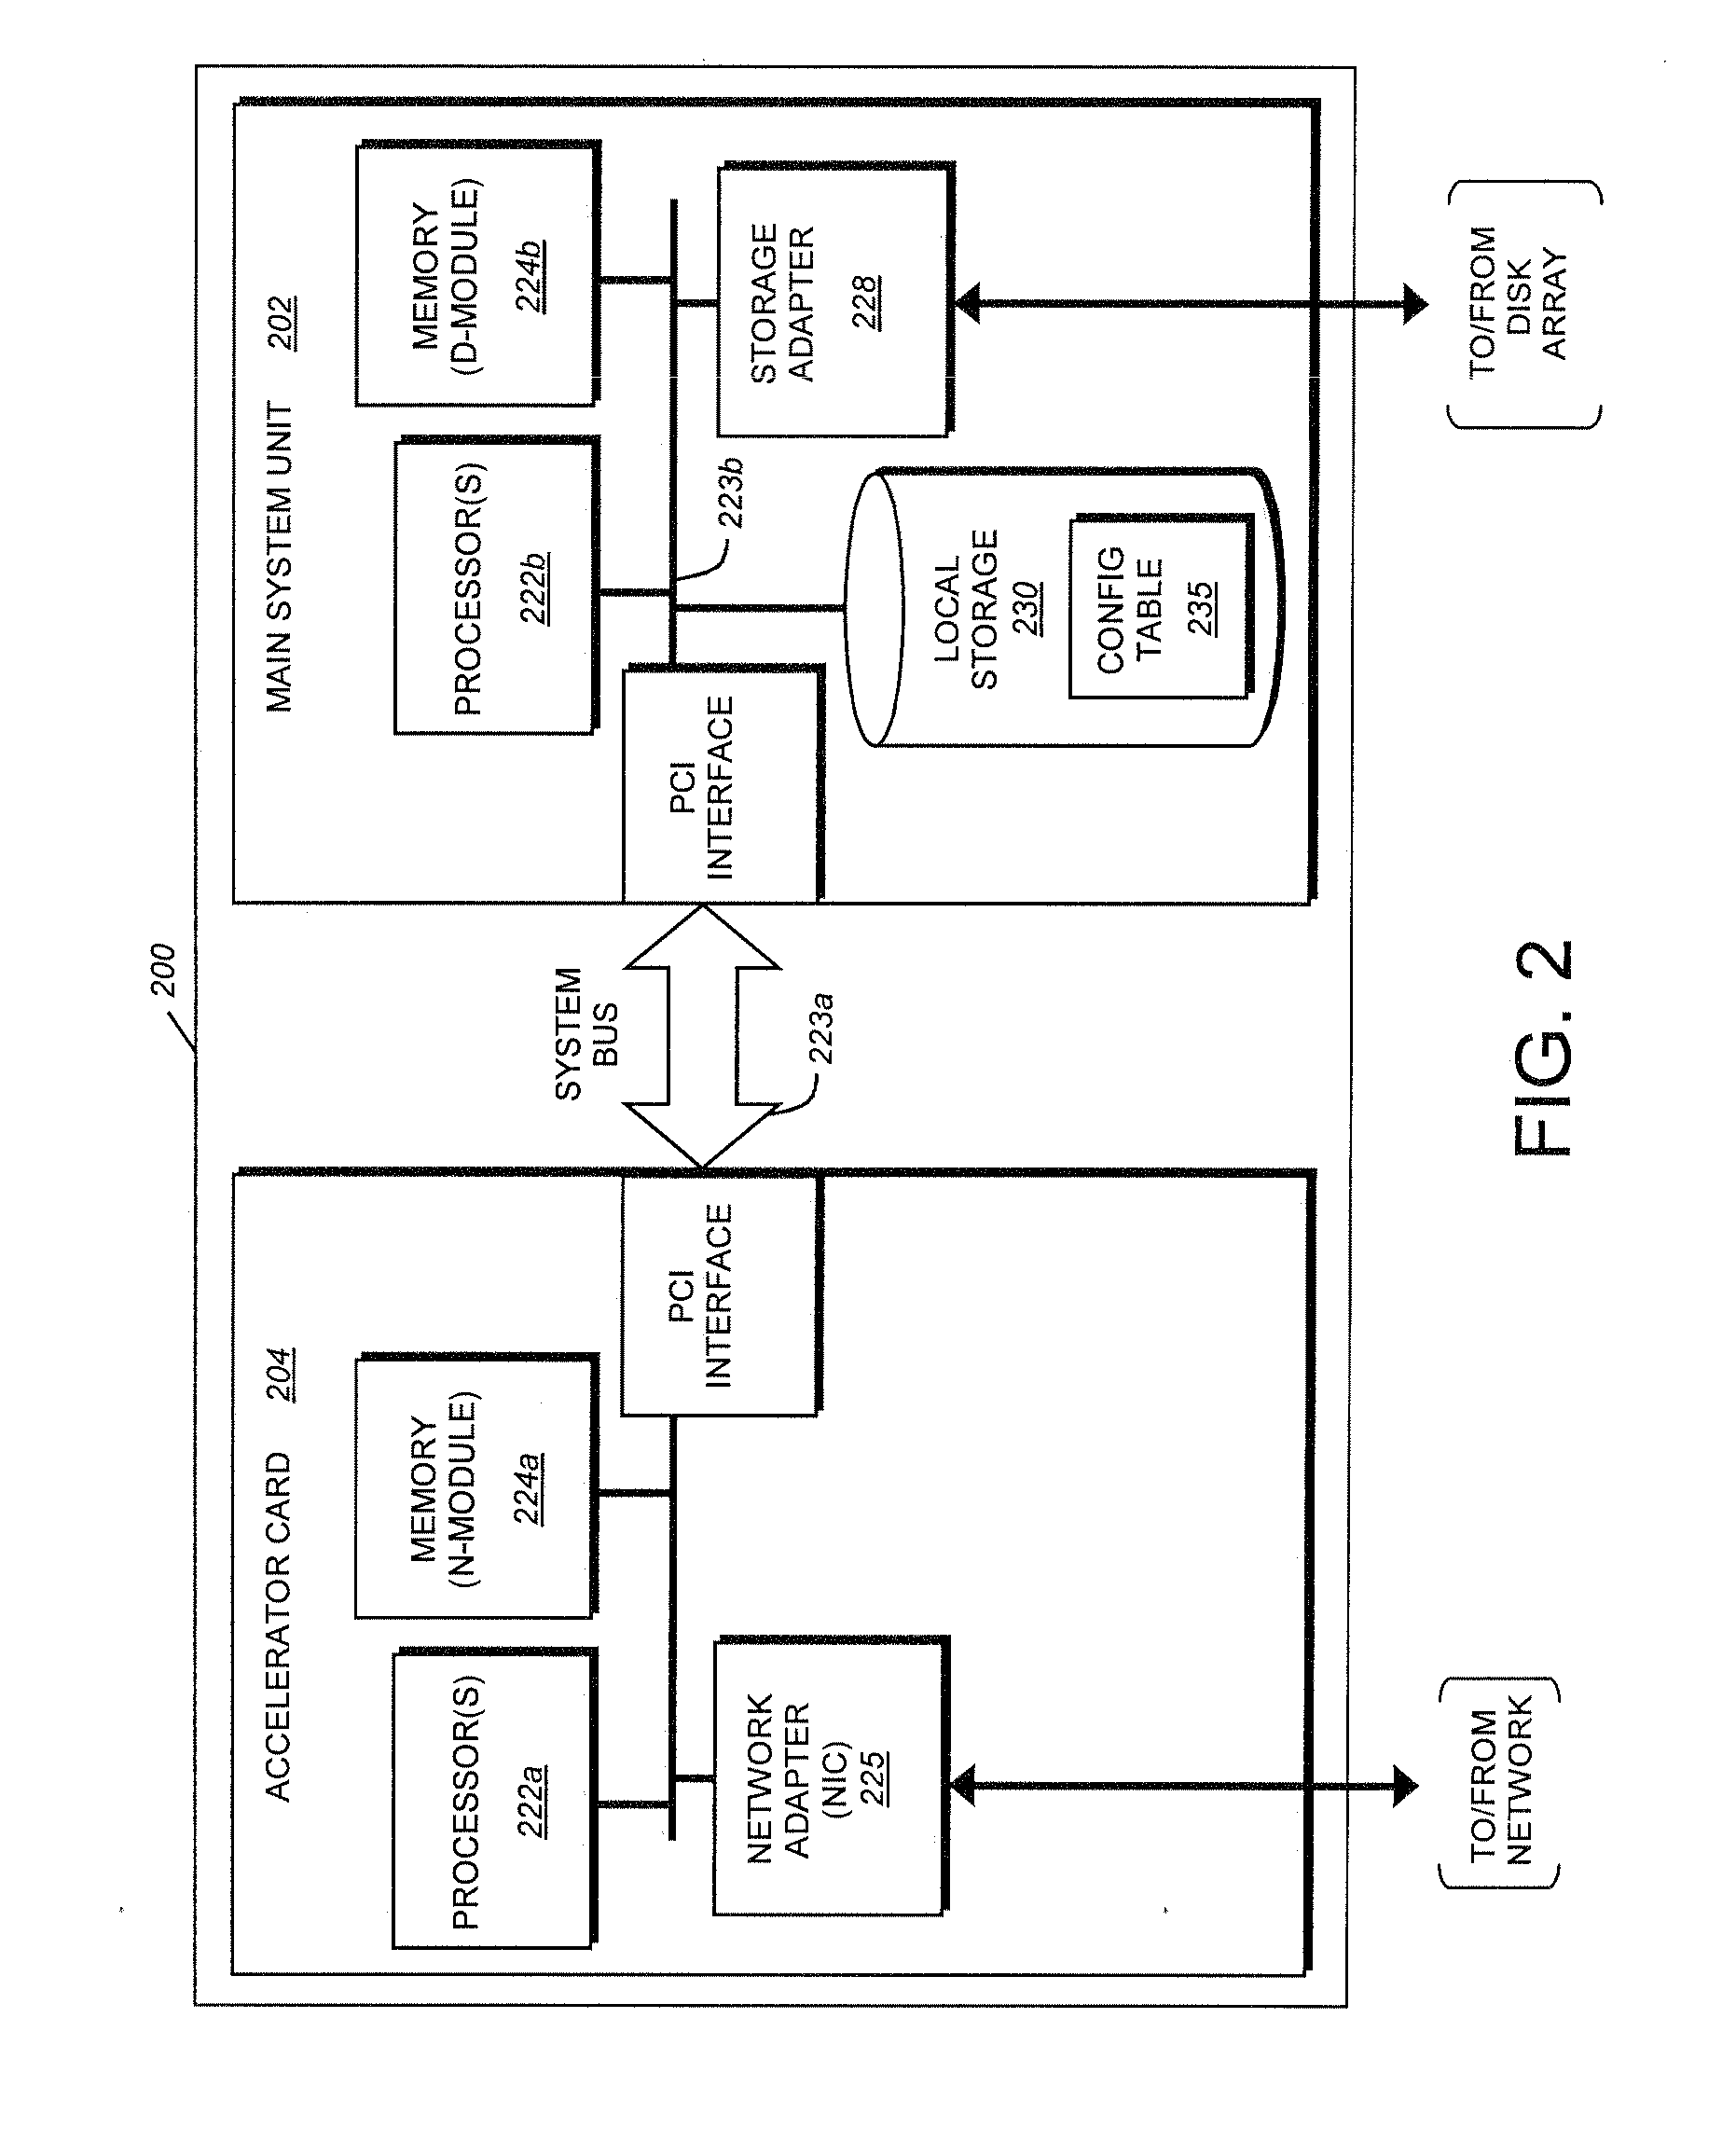 Method and apparatus for offloading network processes in a computer storage system